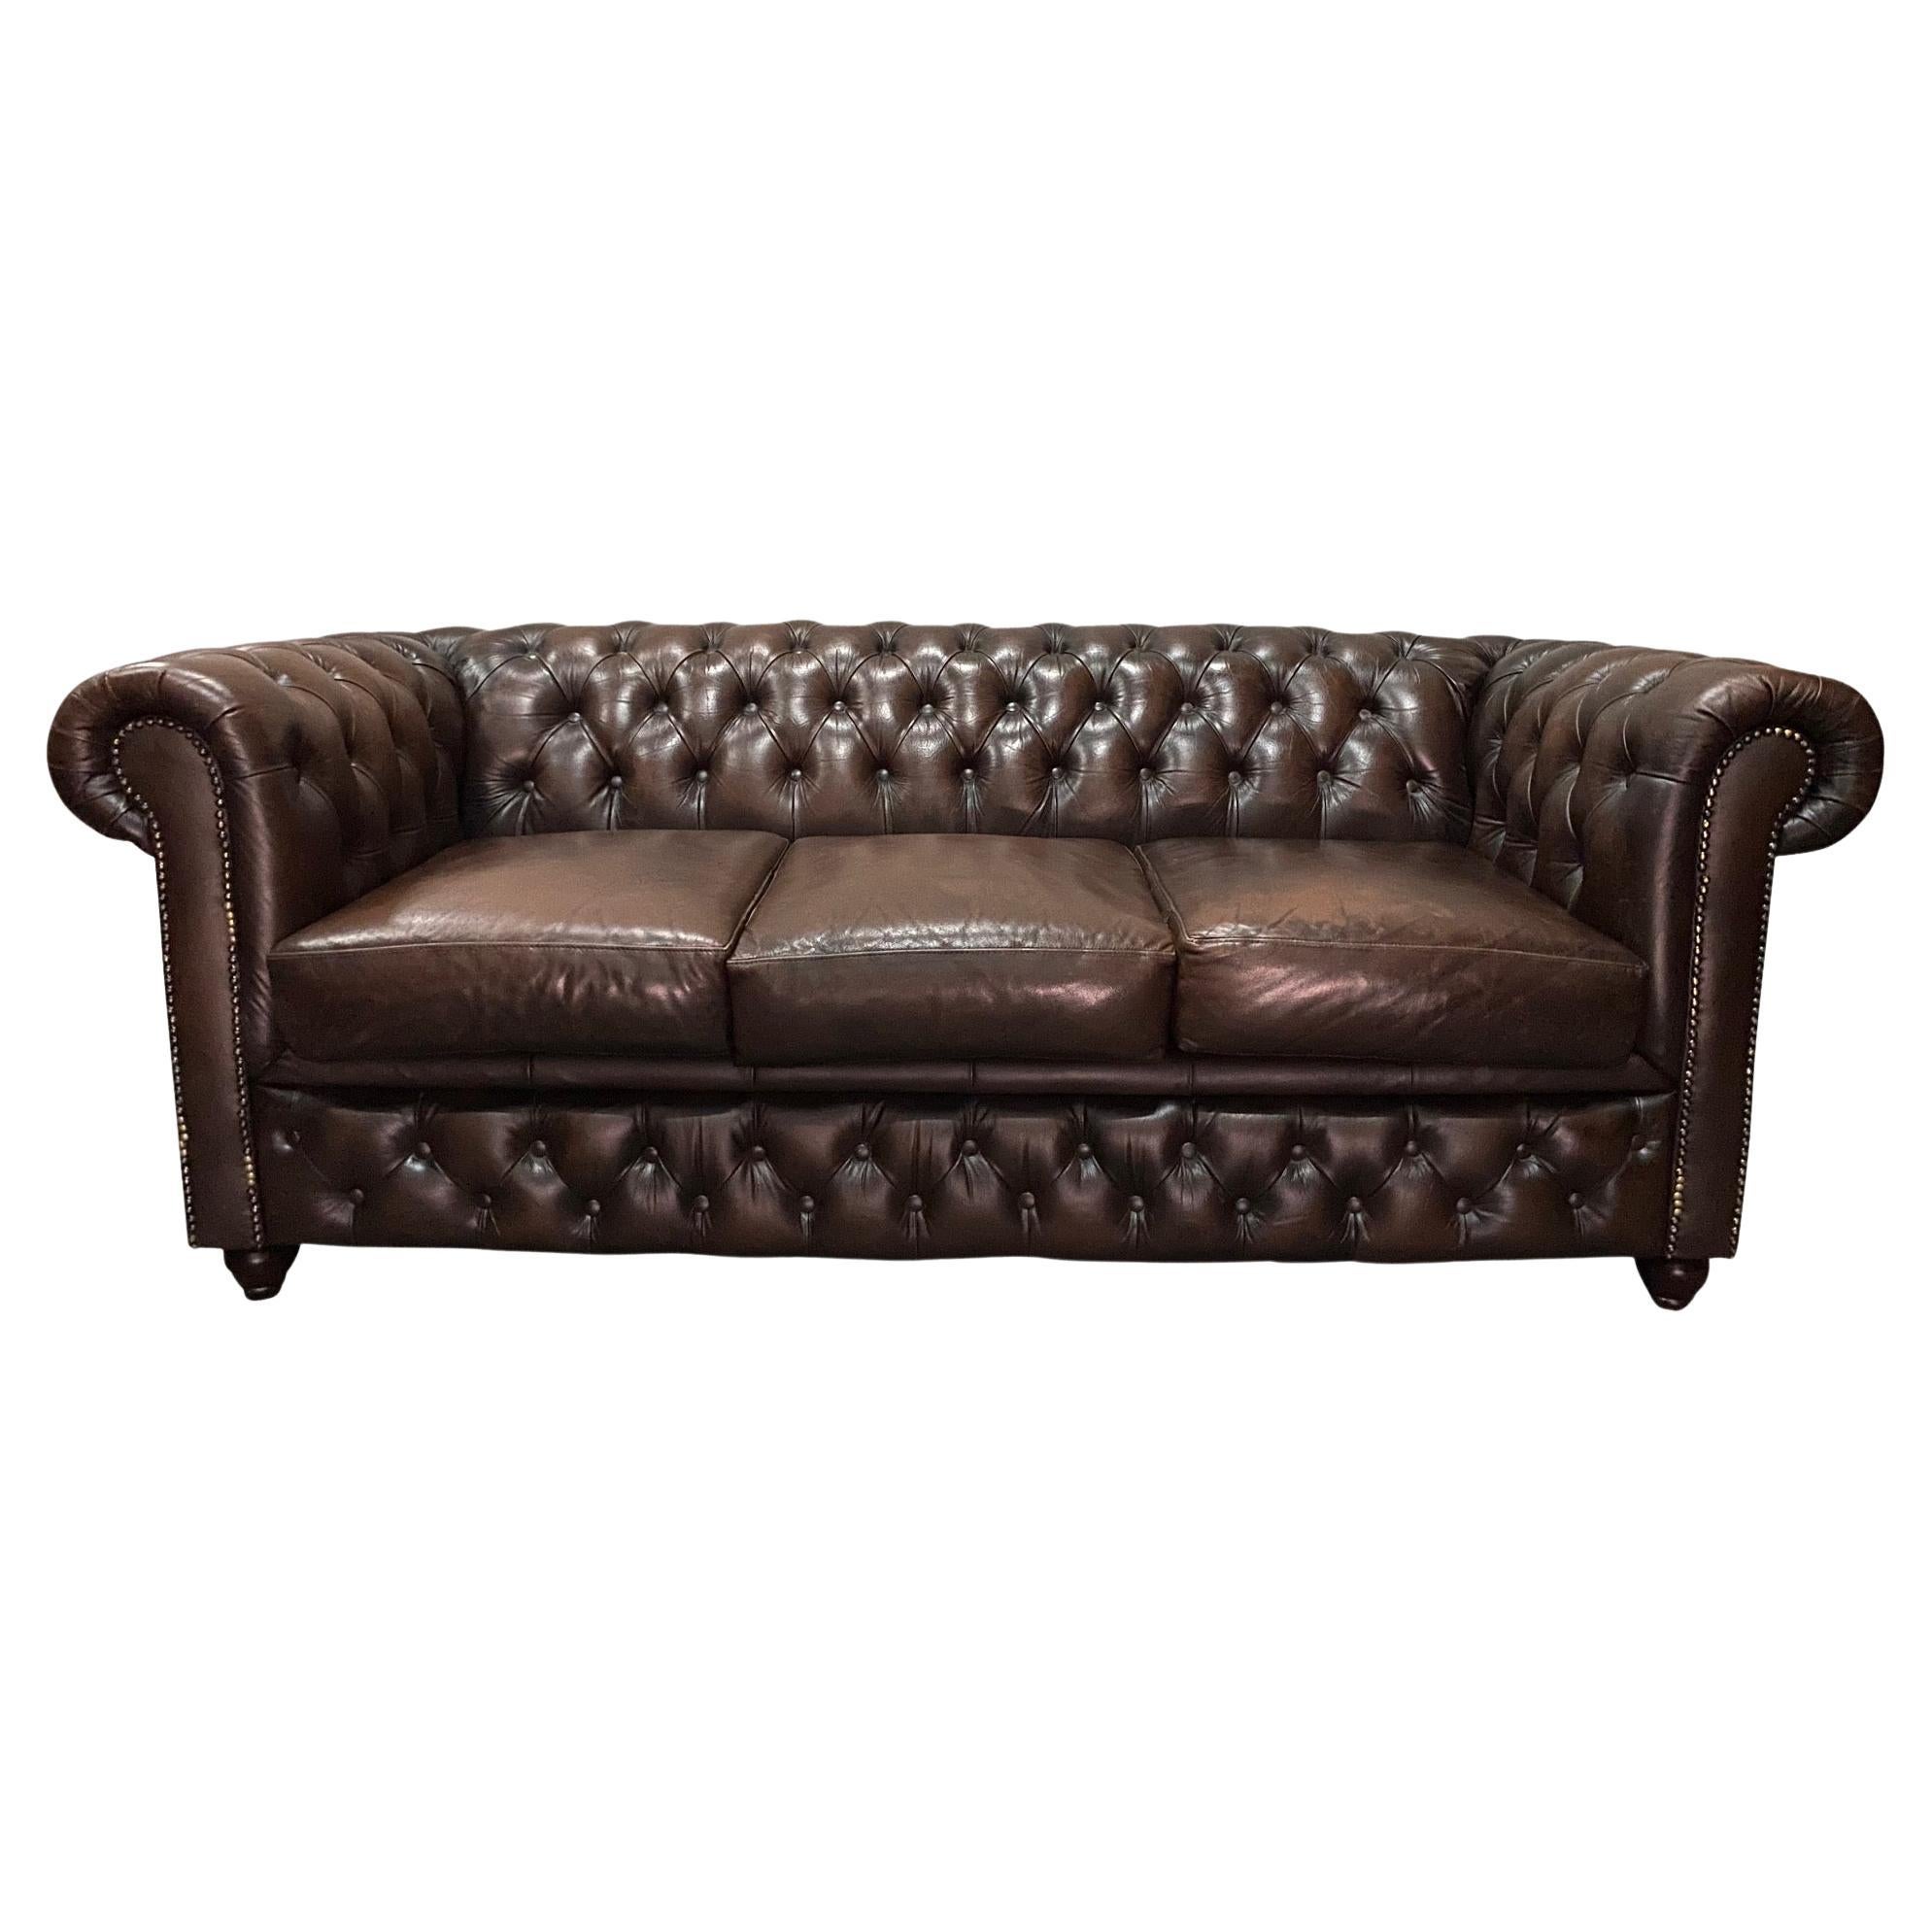 20th Century Vintage Brown Leather Three Seater Chesterfield Sofa